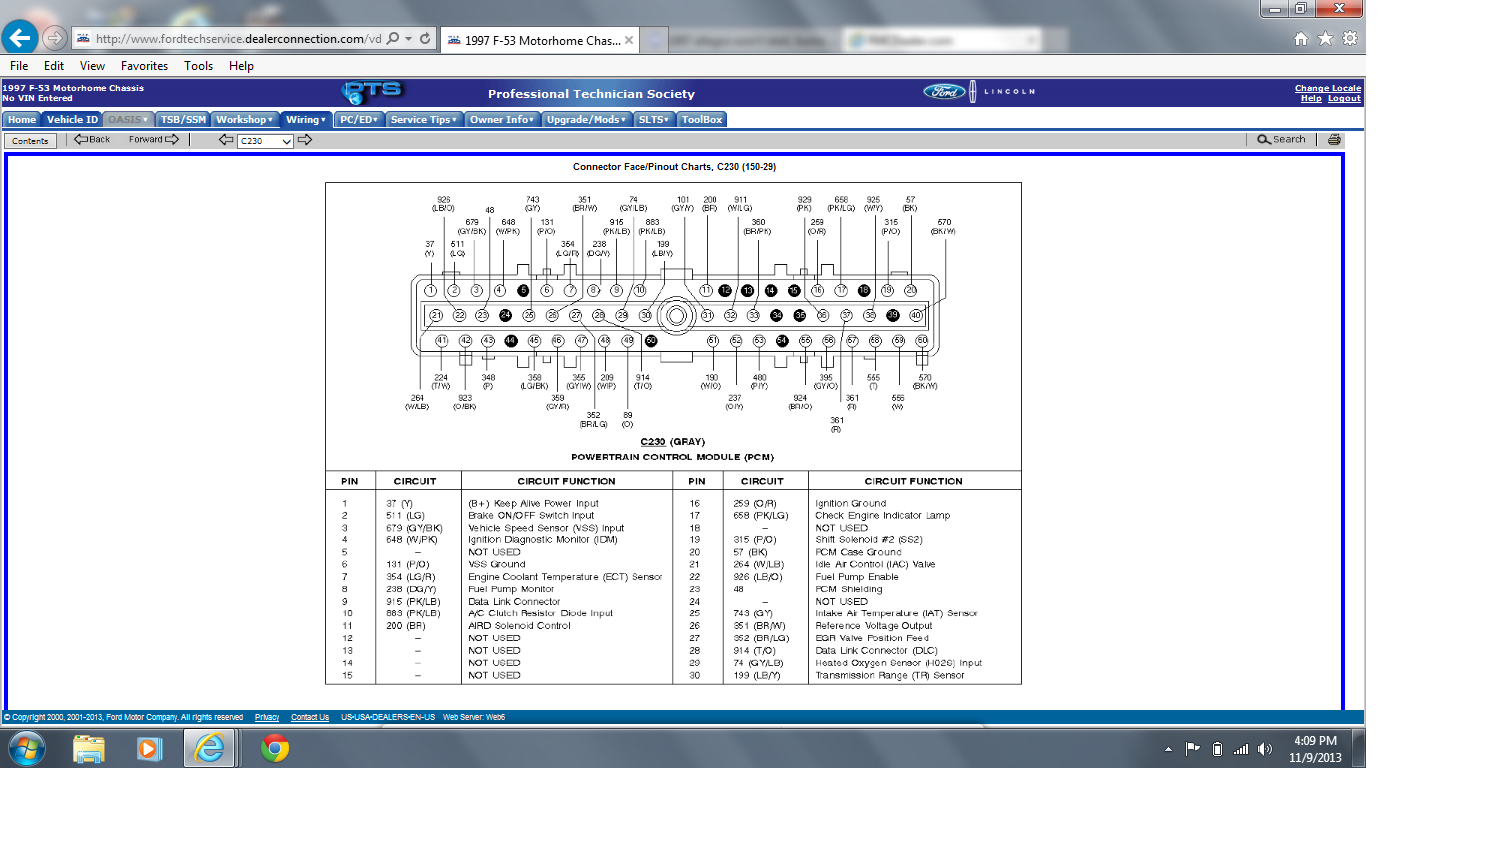 2002 workhorse chassis wiring diagram